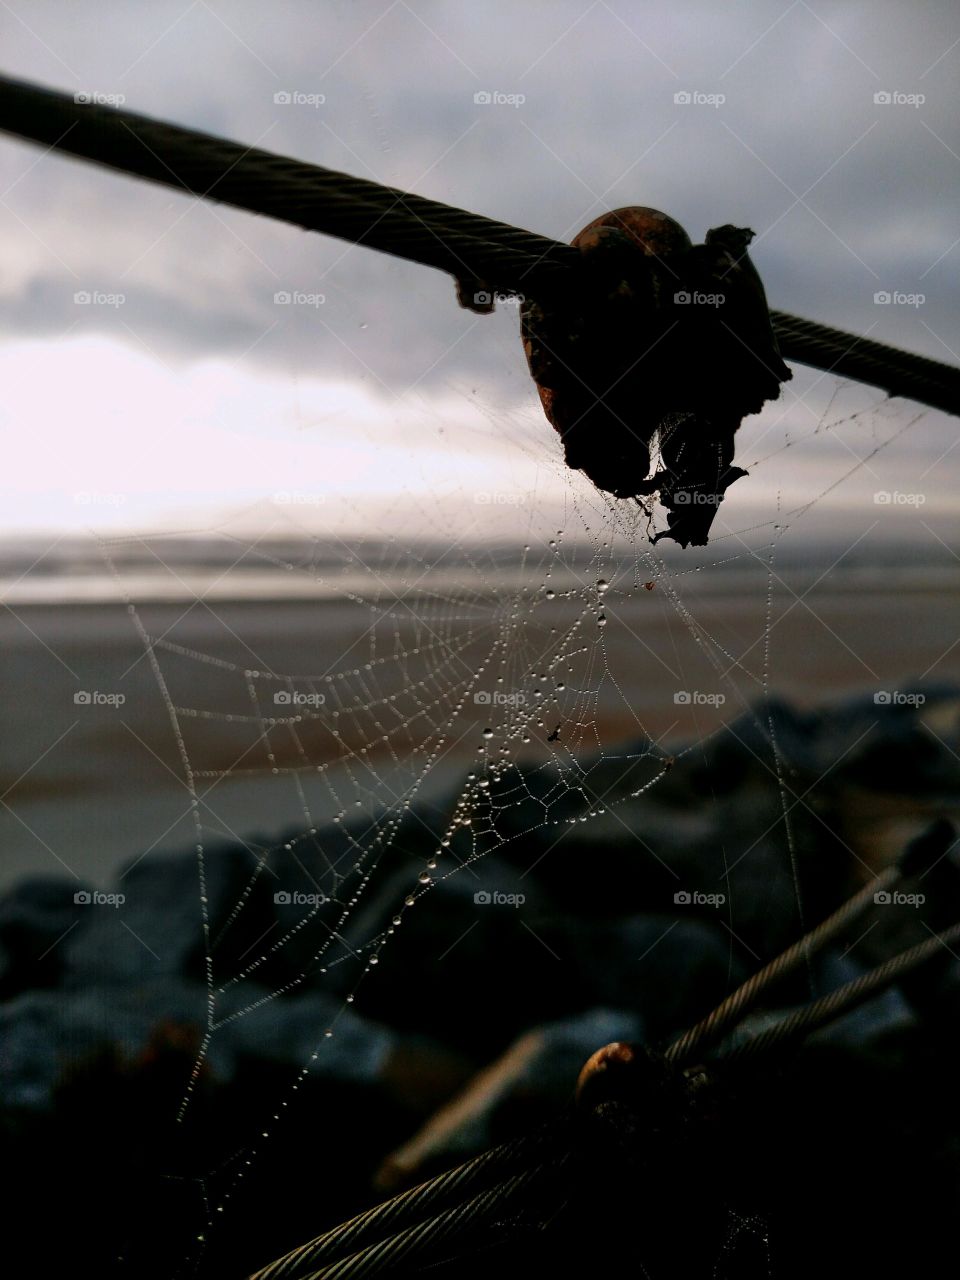 Web between the Cables